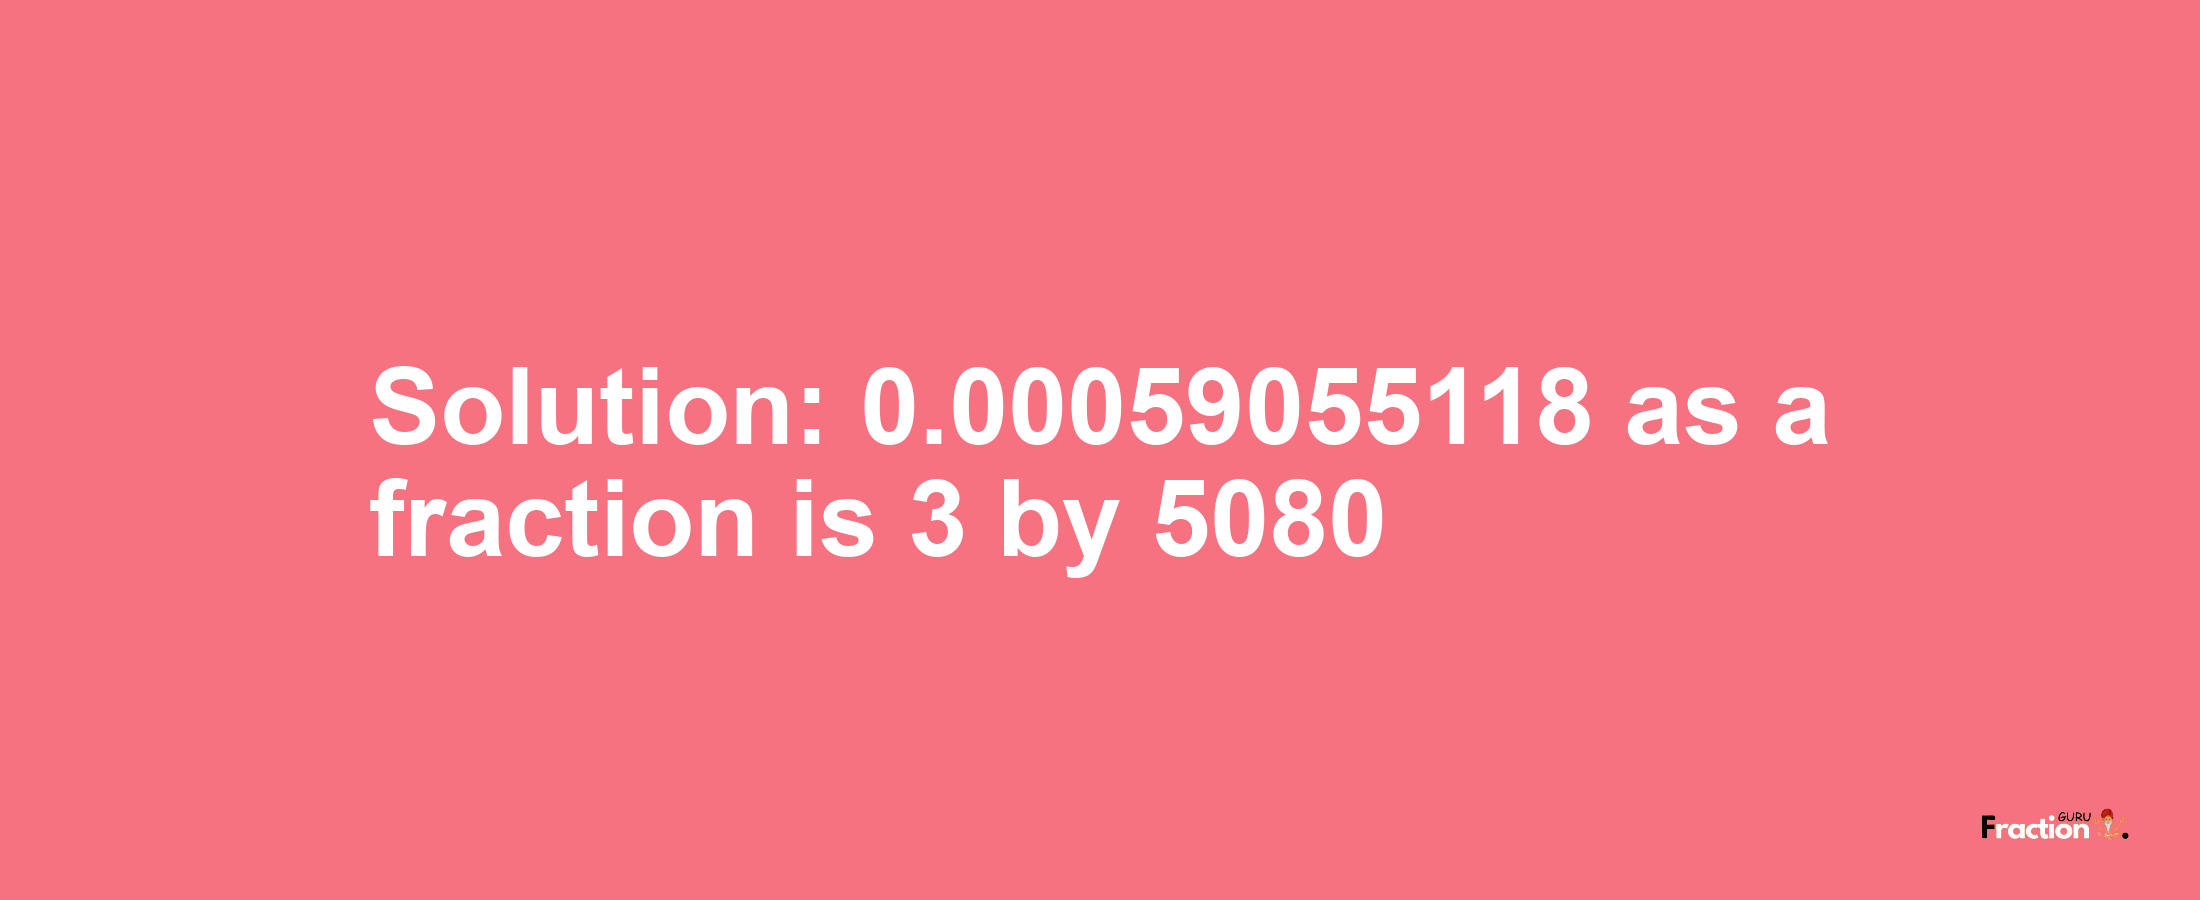 Solution:0.00059055118 as a fraction is 3/5080